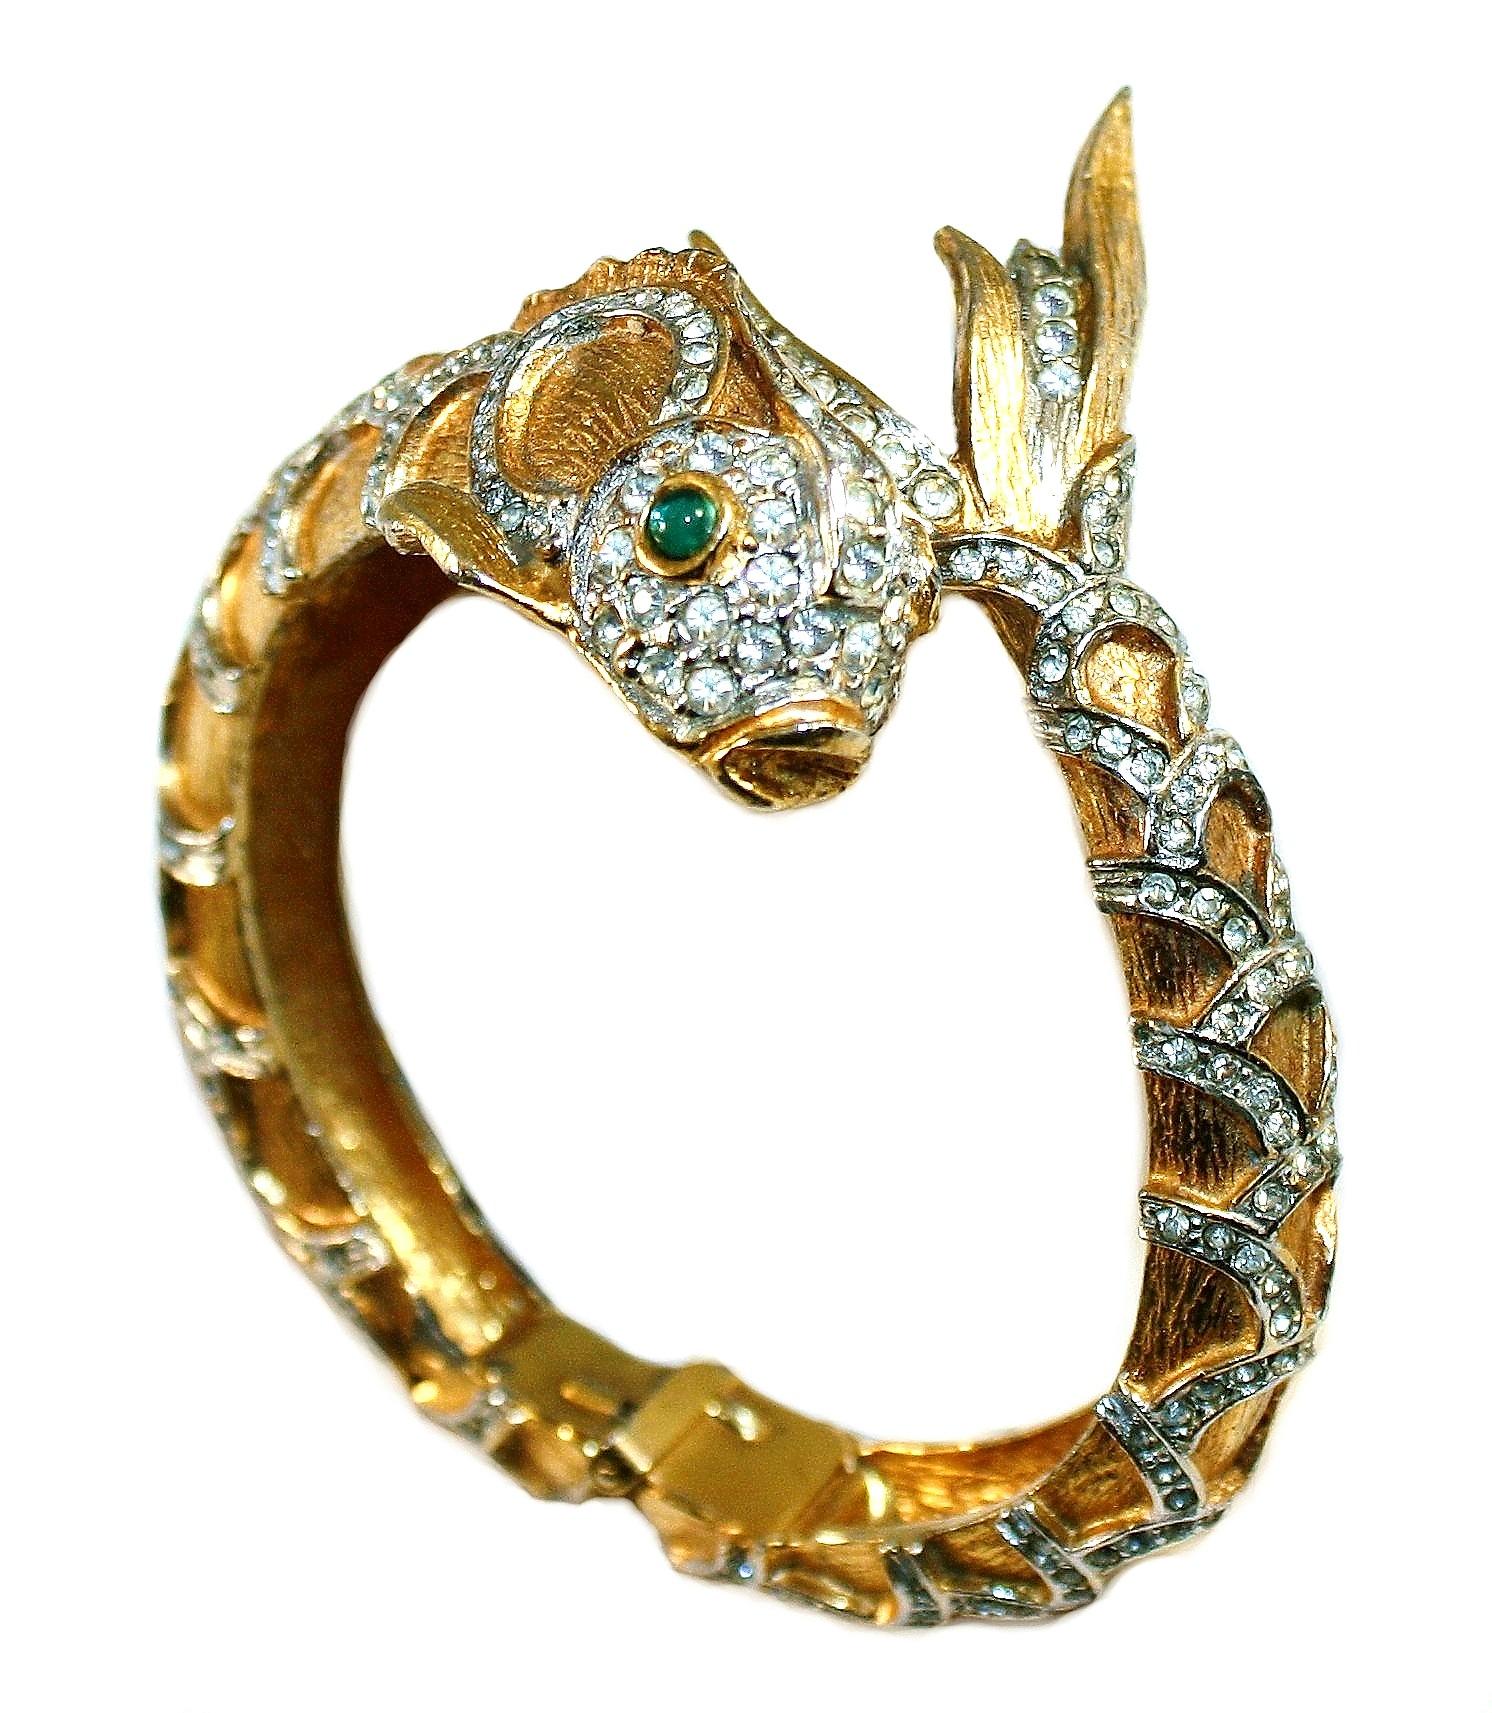 Circa 1970s Kenneth Lane bright, gold tone textured metal hinged bangle made in a Koi fish design.  It is set with small clear crystals and green glass cabochon eyes.  The interior measures 6.5